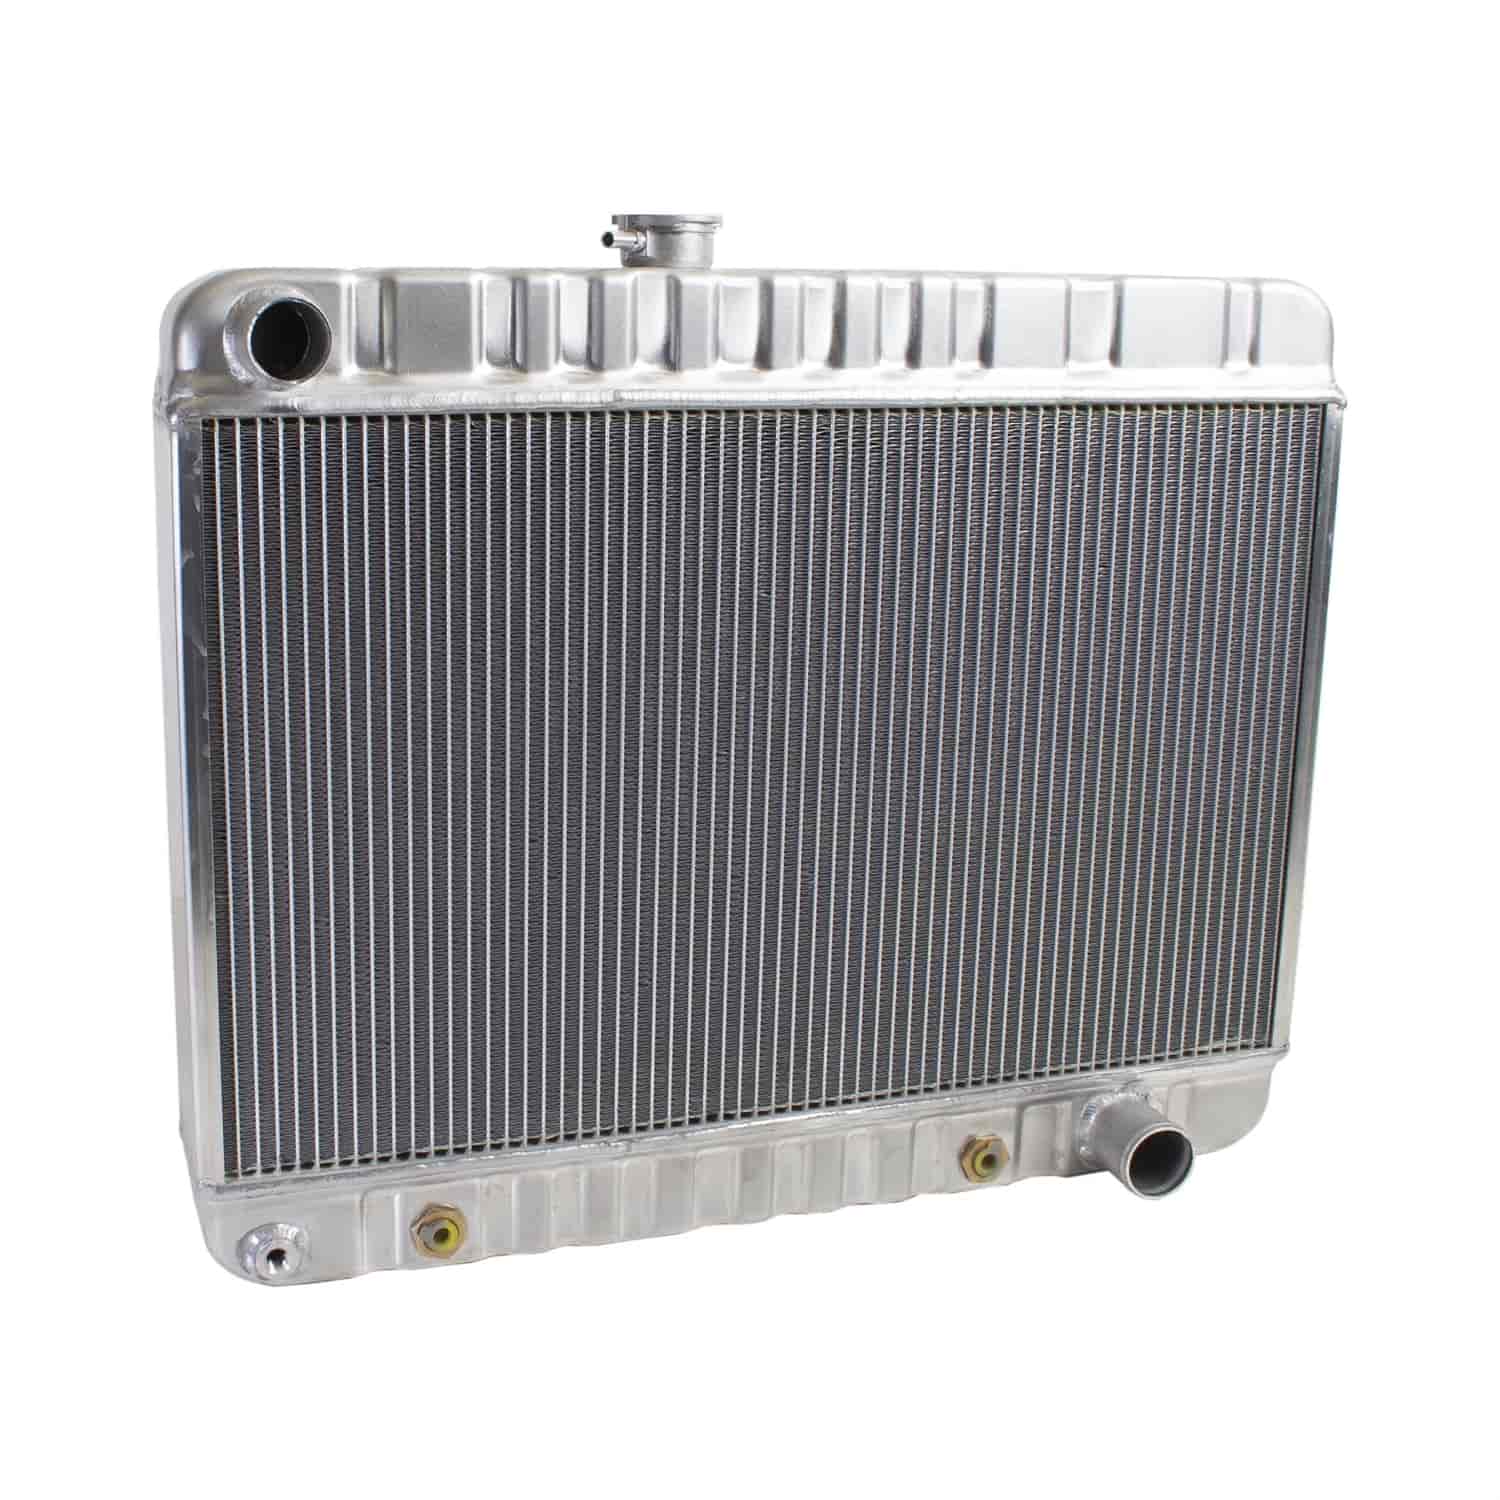 ExactFit Radiator for 1965-1967 GTO/Lemans/Tempest with